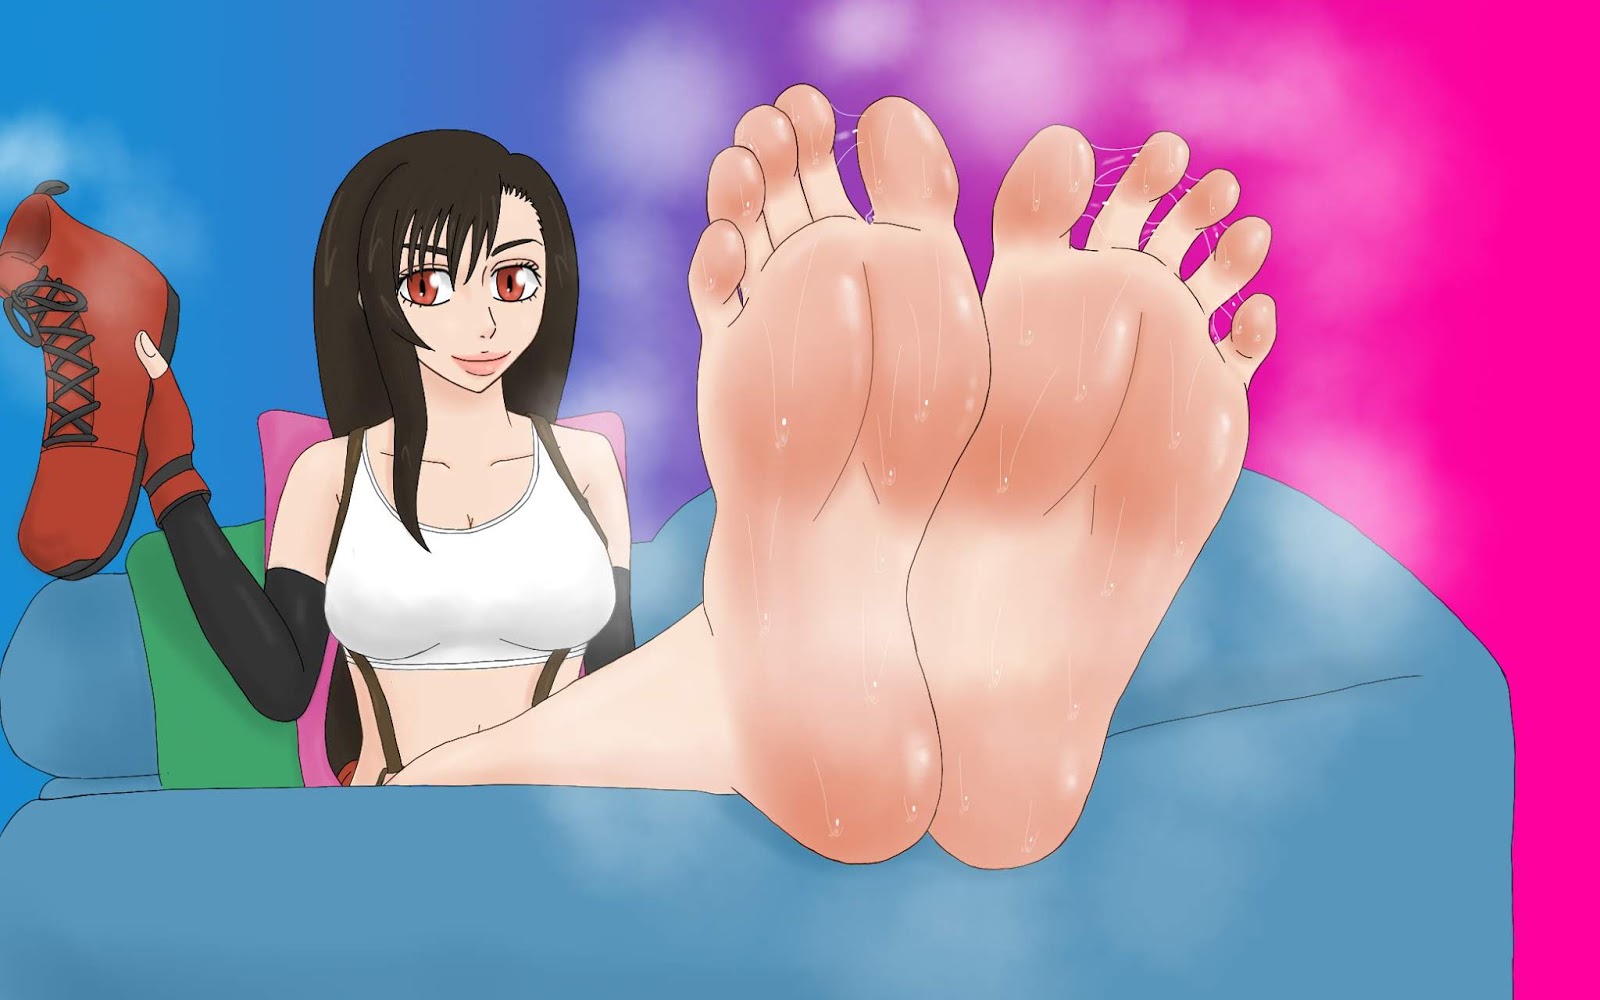 As you can see, there's isn't much foot content of Tifa